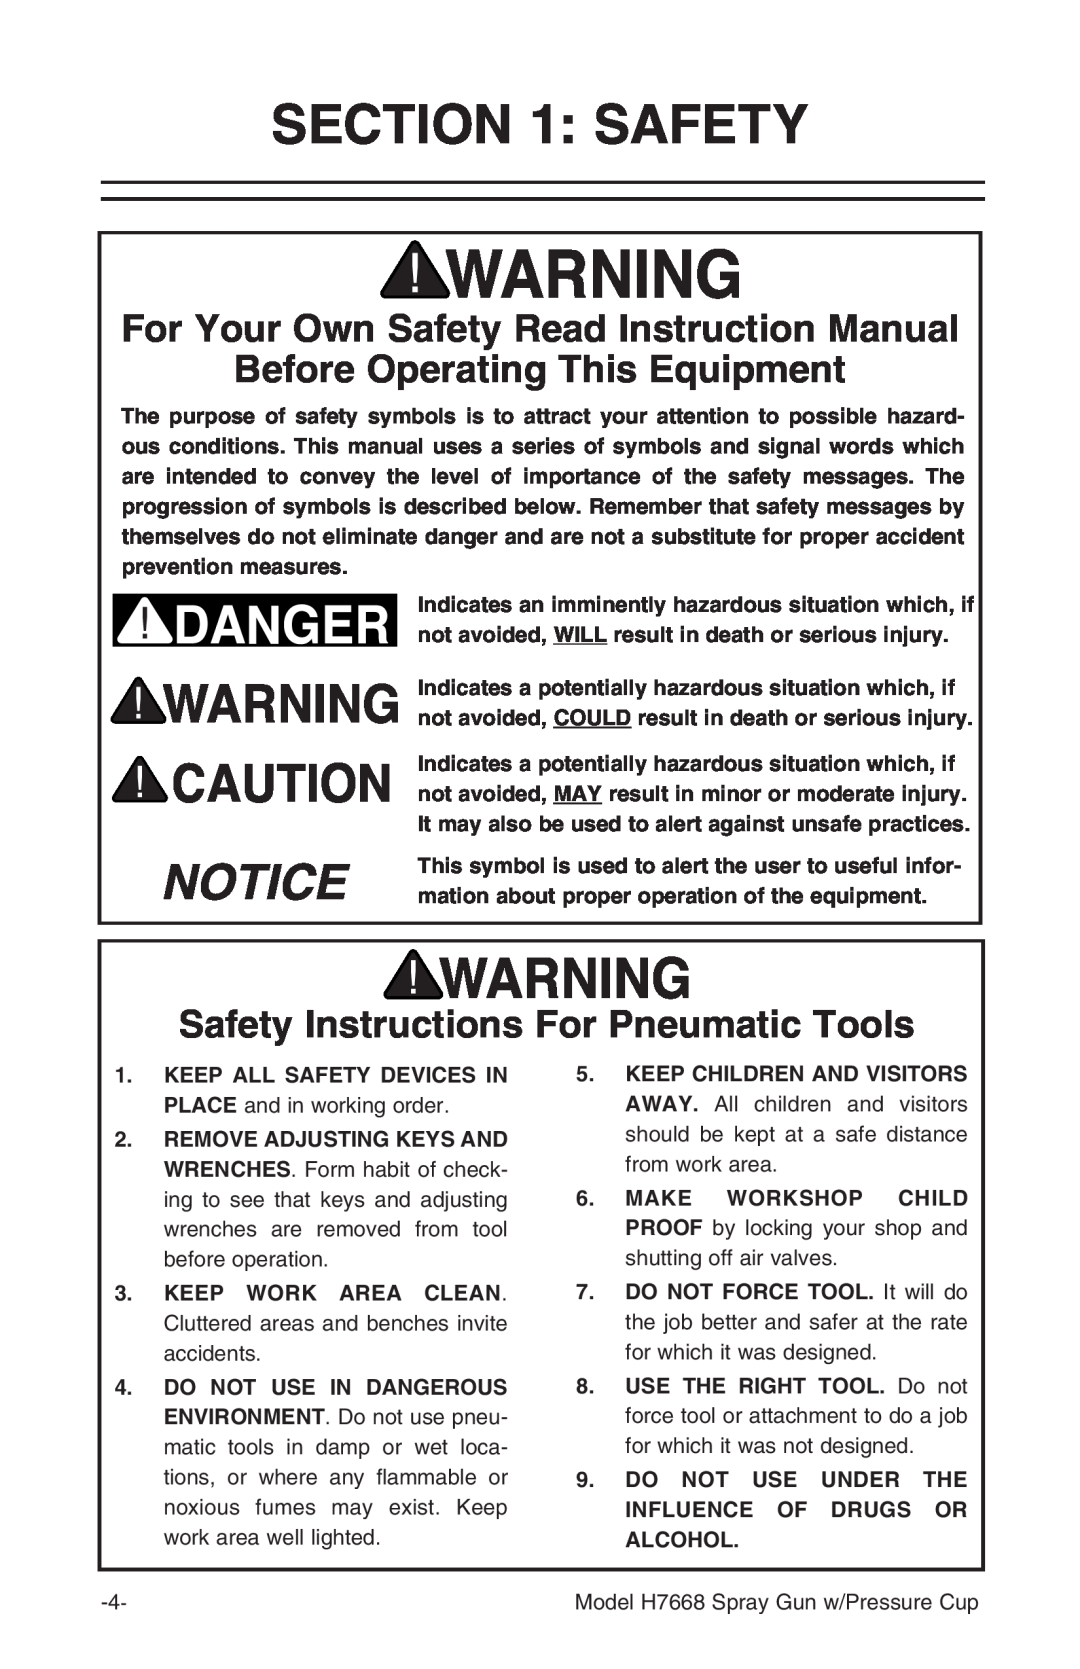 Grizzly H7668 instruction manual For Your Own Safety Read Instruction Manual, Before Operating This Equipment 